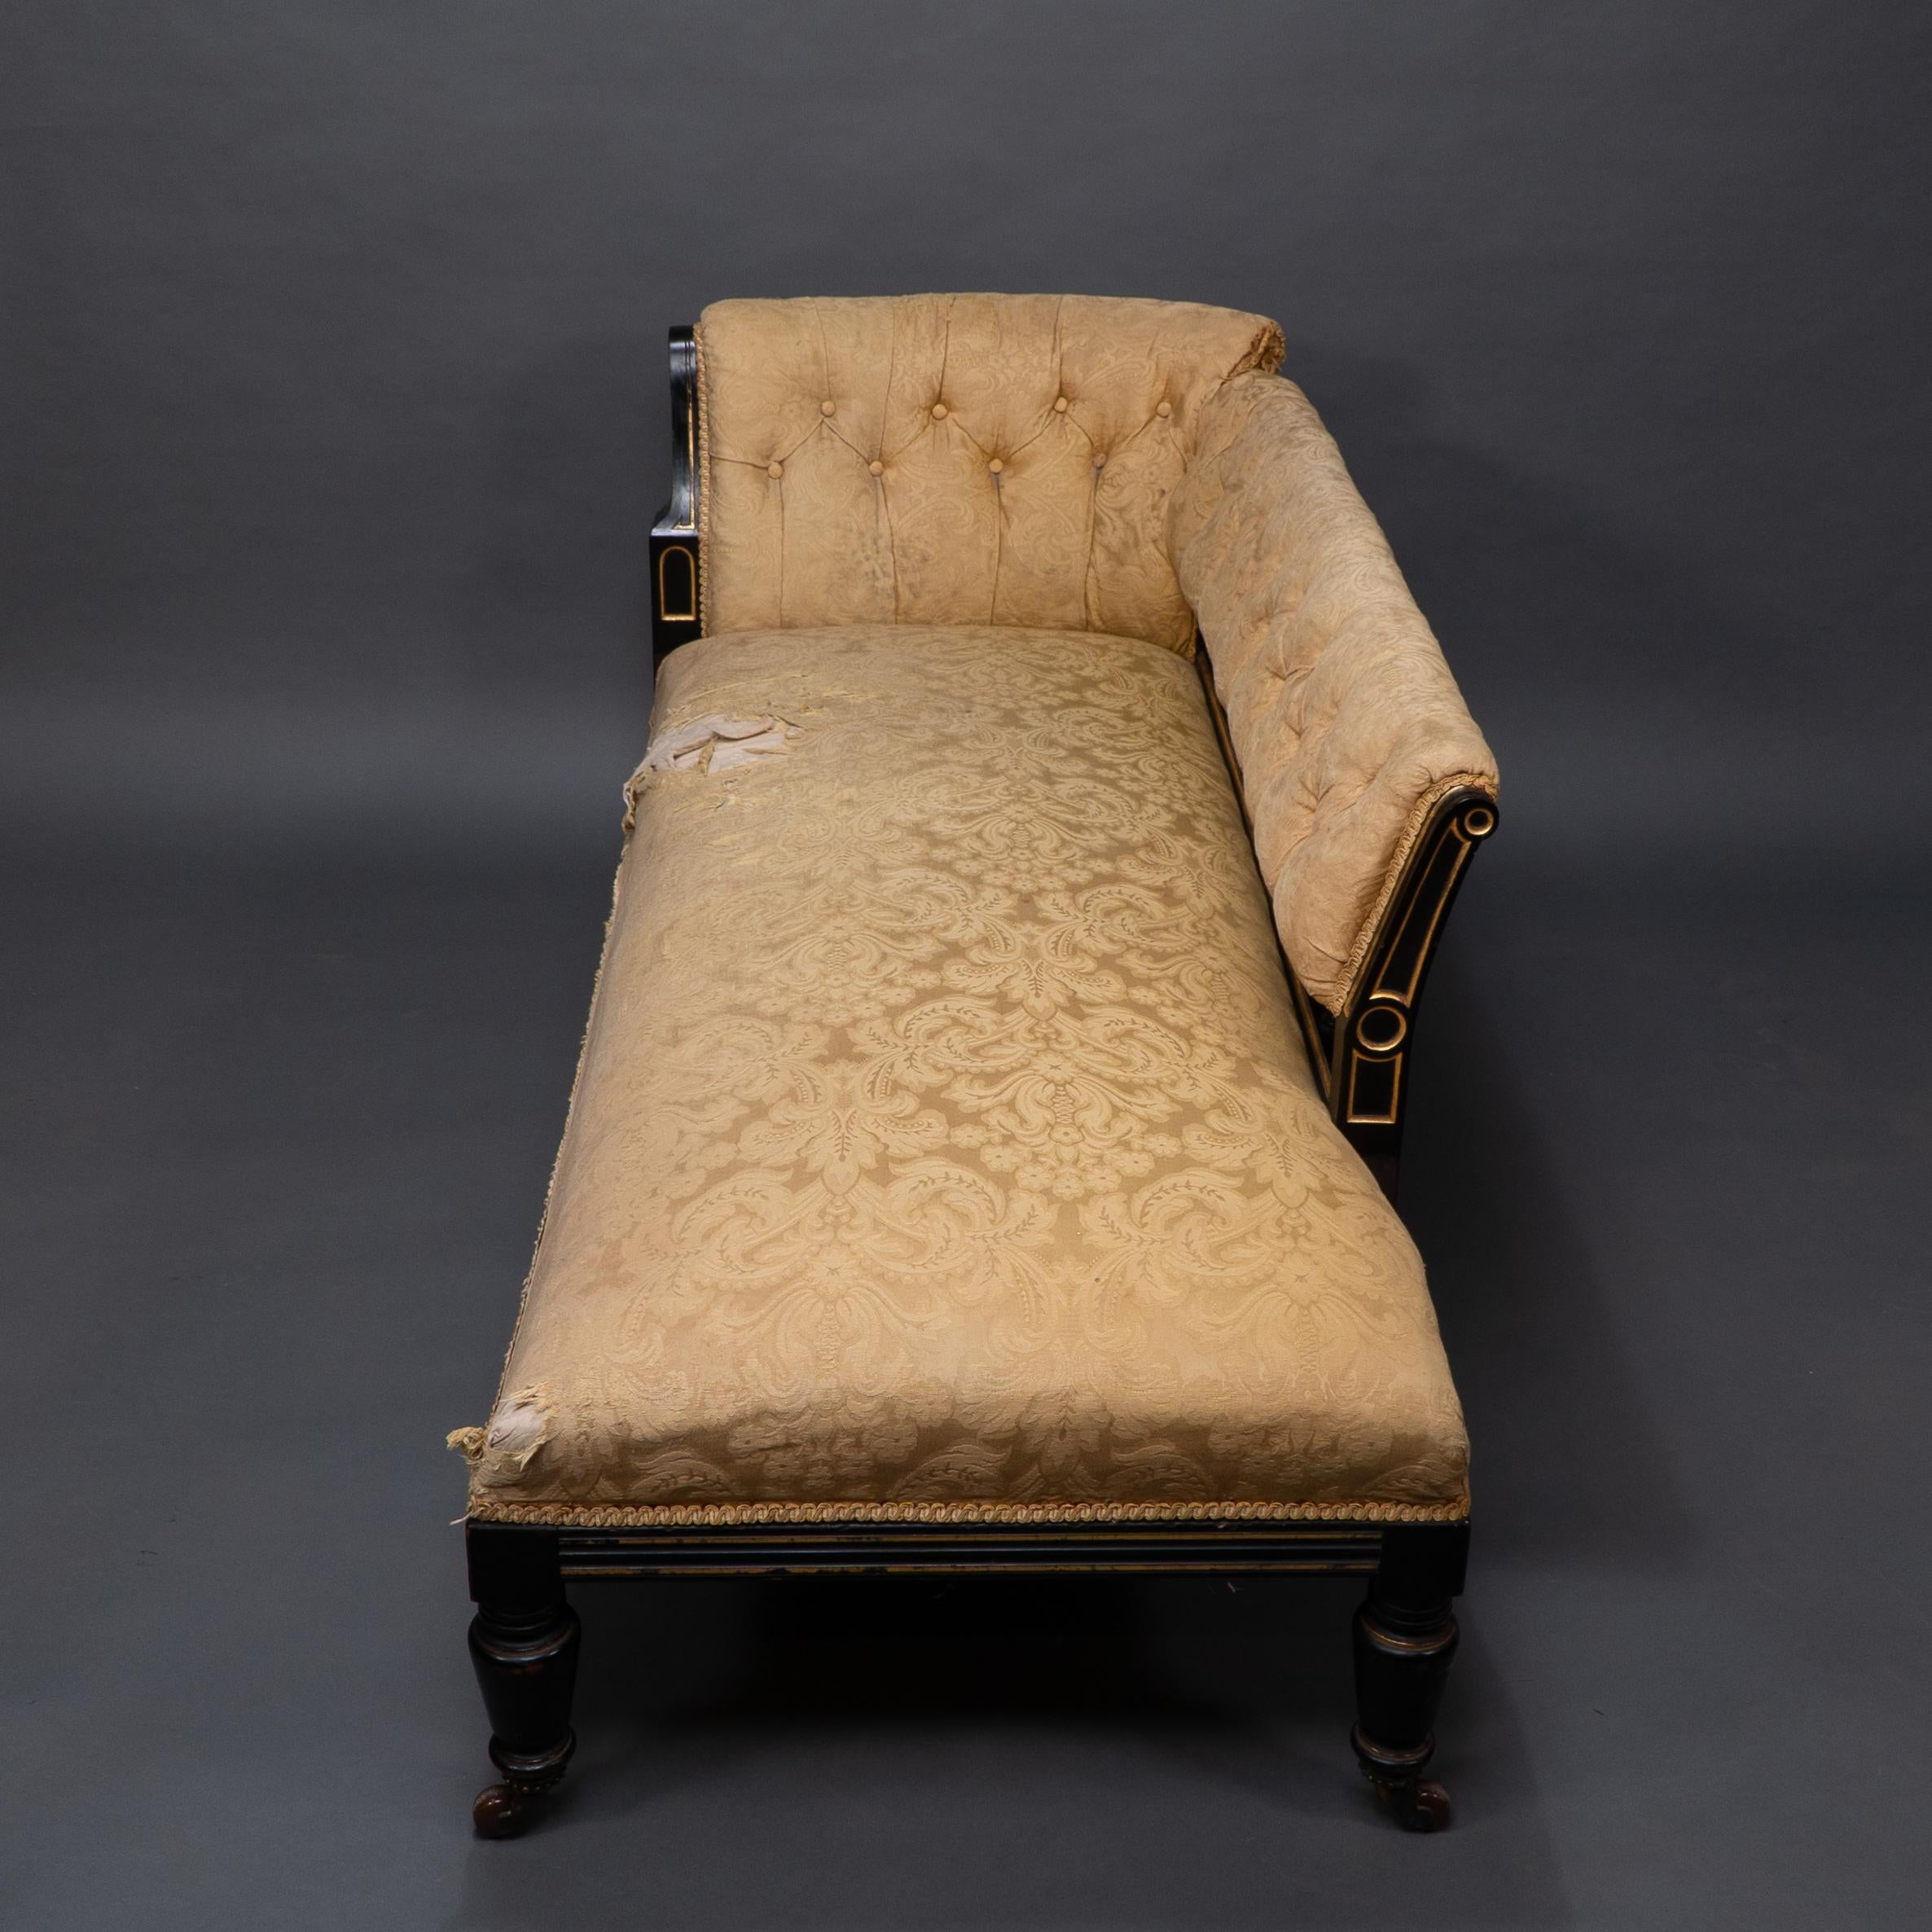 English Charles Bevan. Marsh & Jones. Aesthetic Movement button back chaise lounge For Sale